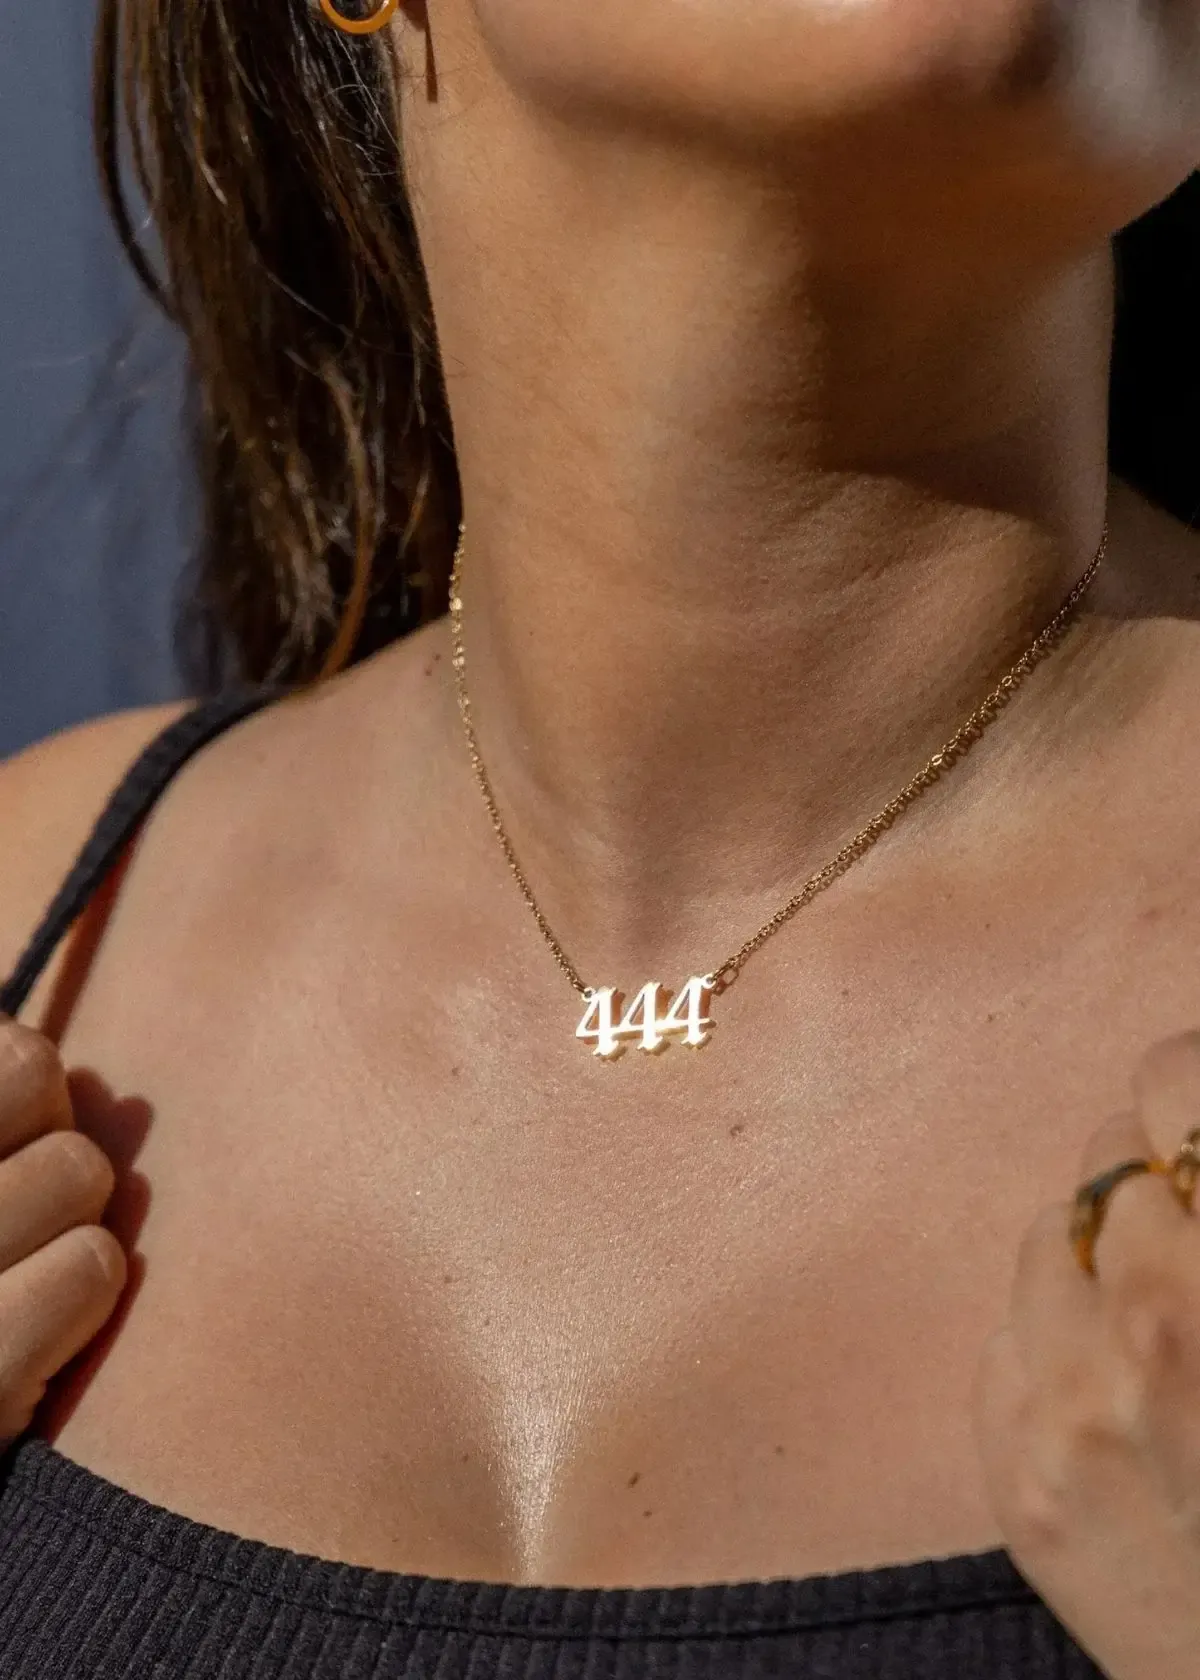 Can wearing a 444 necklace bring luck or positive energy?